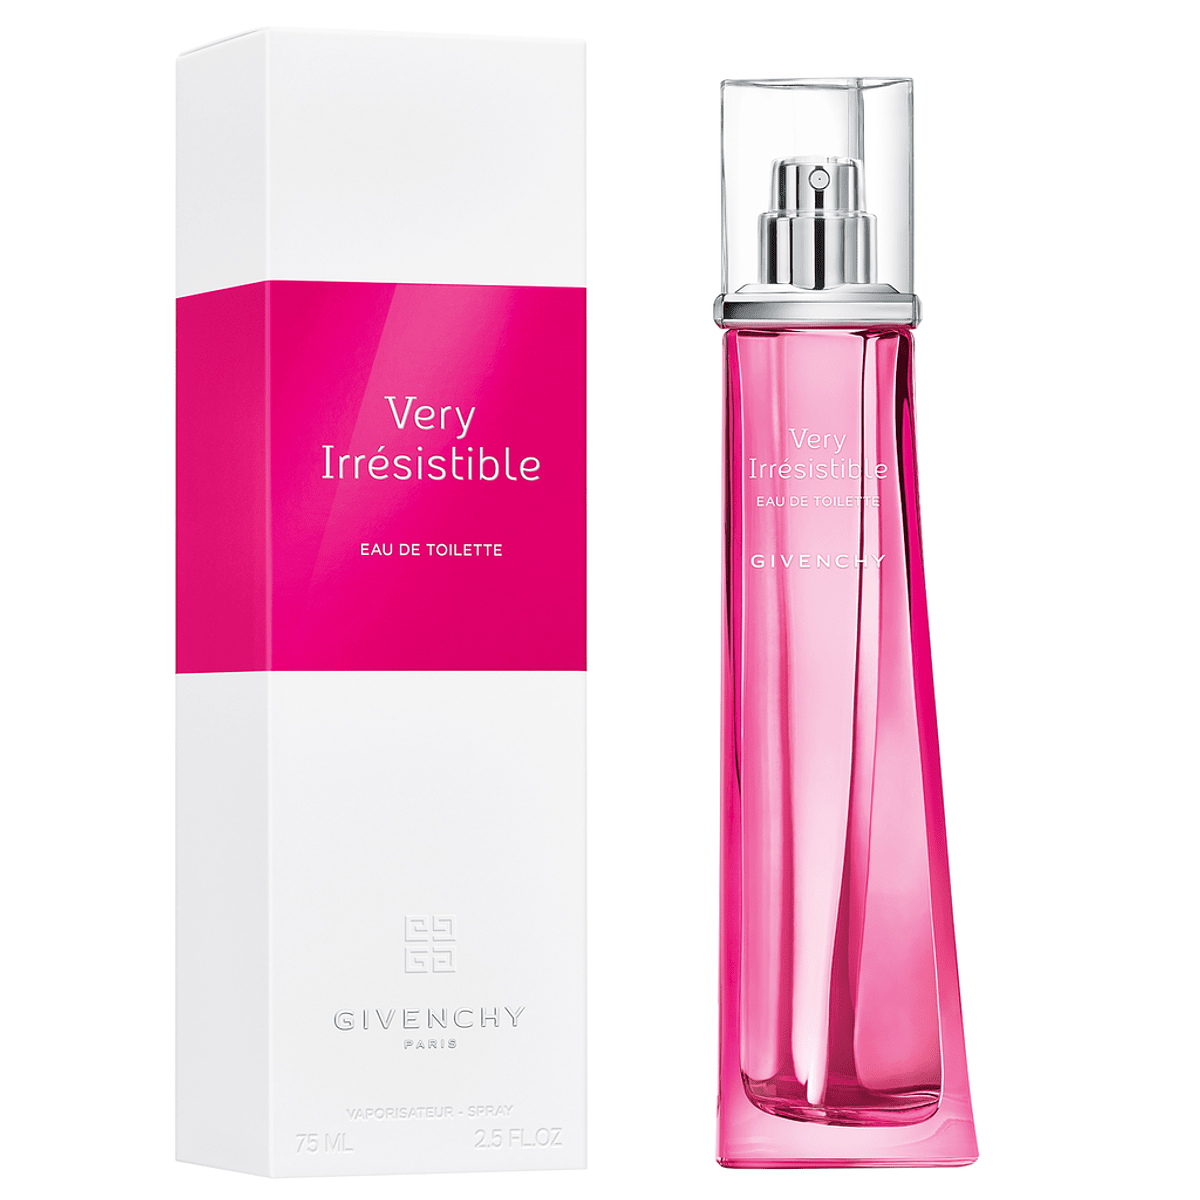 Very Irrésistible EDT Mujer 75 Ml